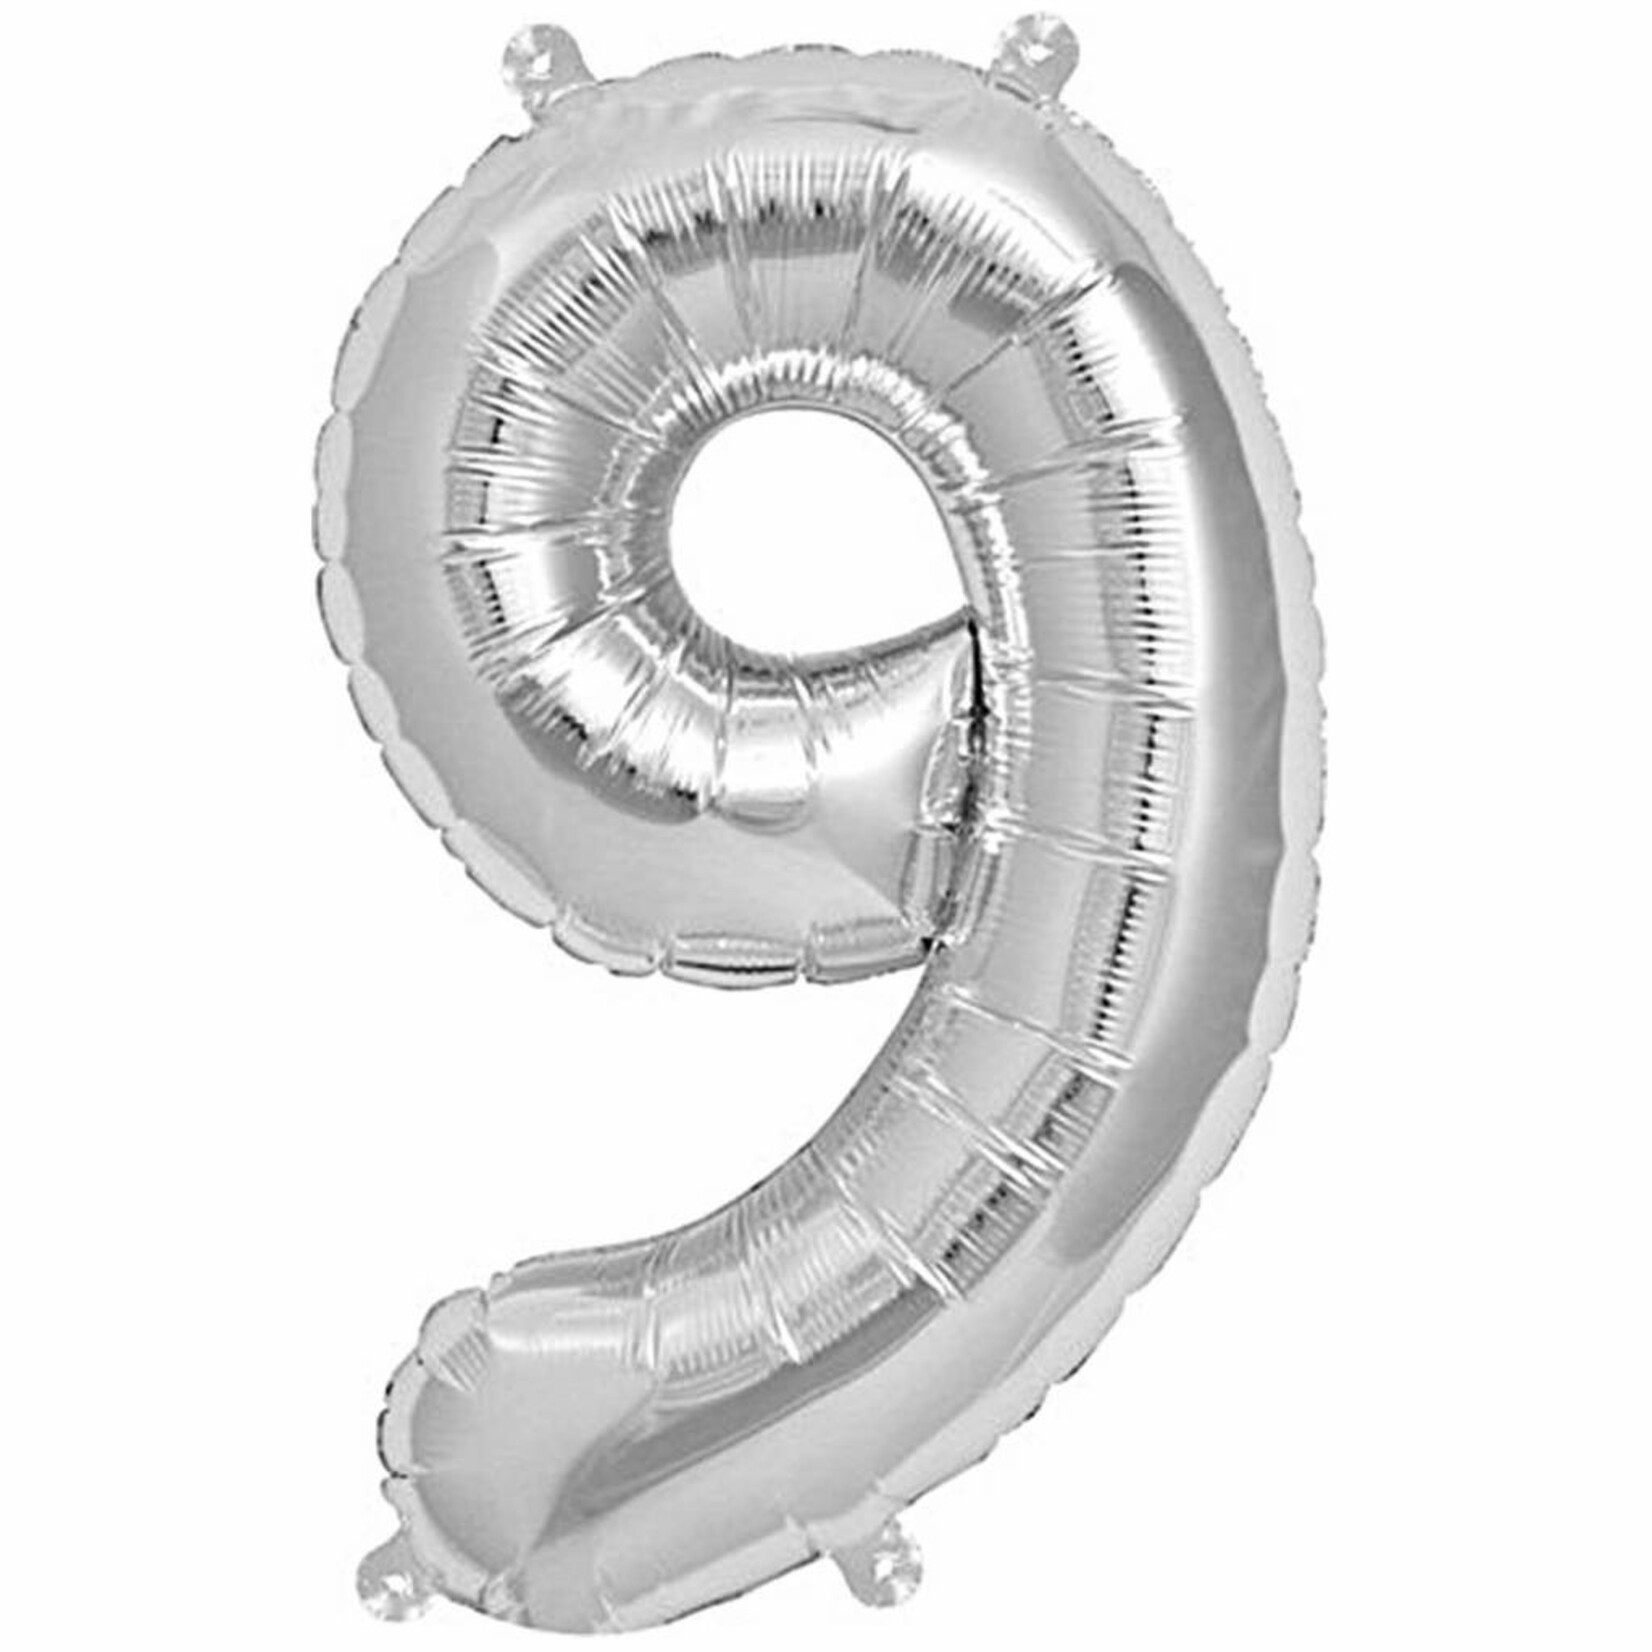 RICO Foil numberballoon large silver 9